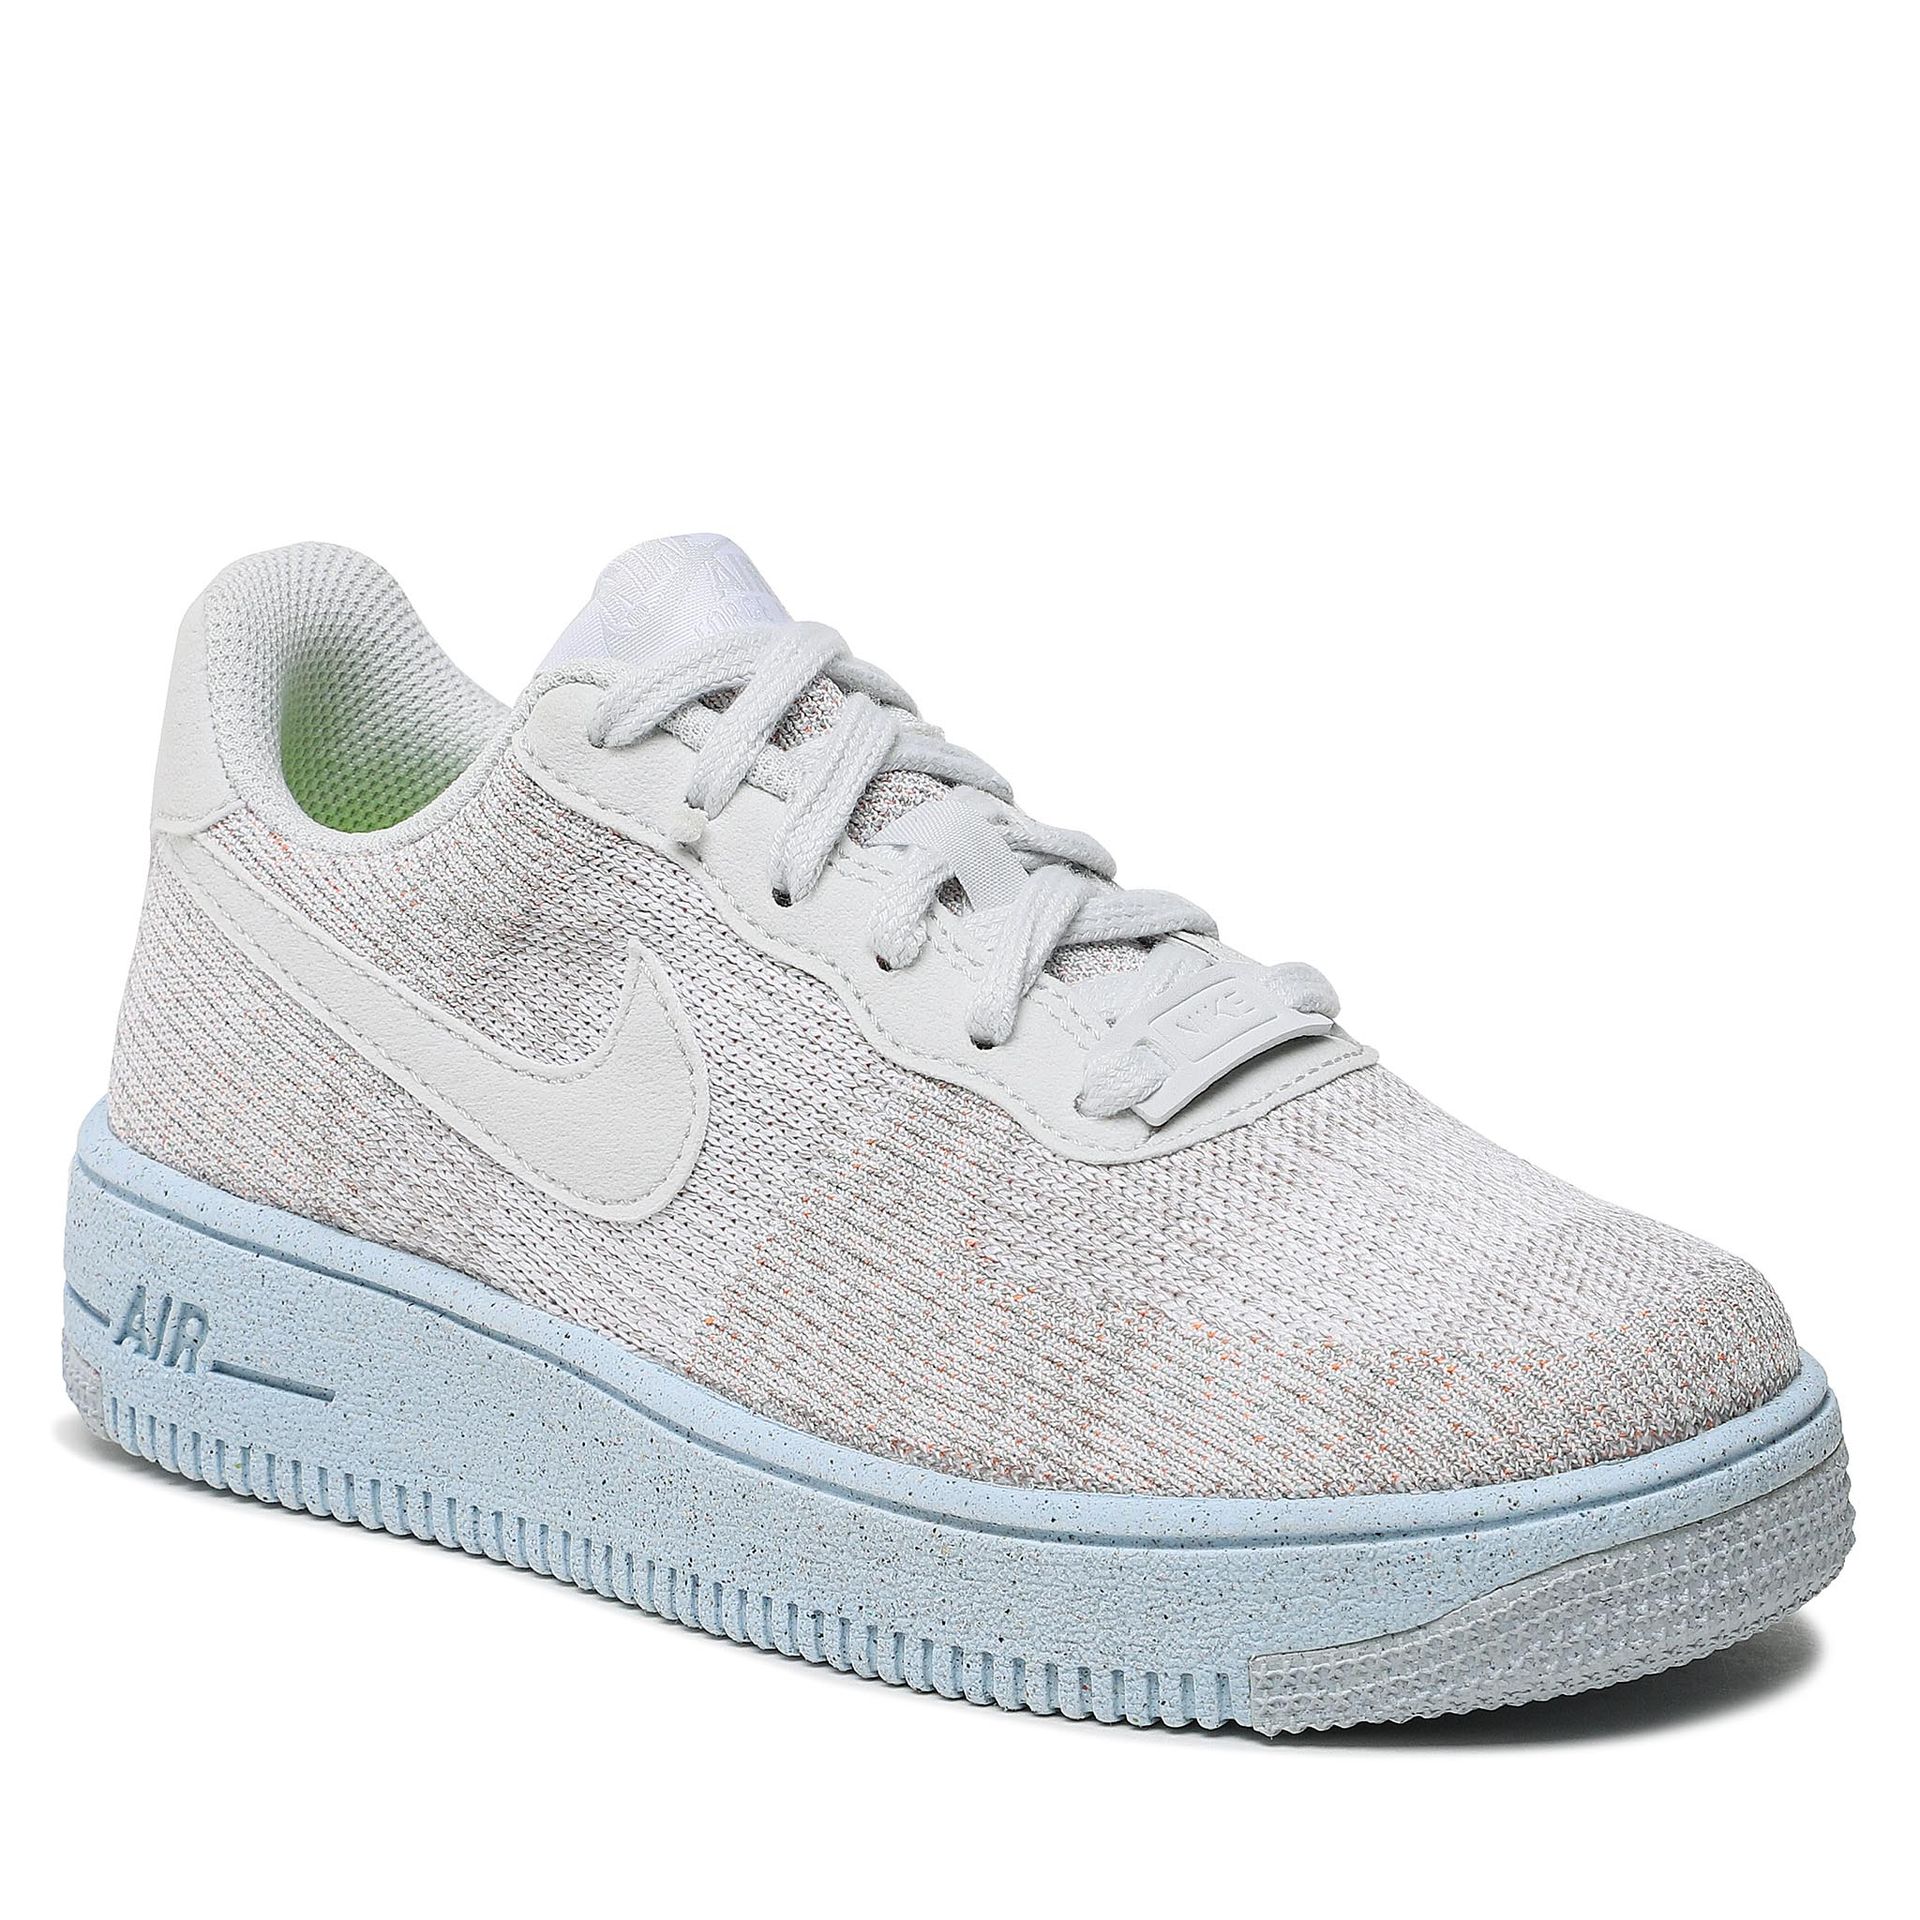 Nike Buty AF1 Crater Flyknit (GS) DH3375 101 White/Photon Dust